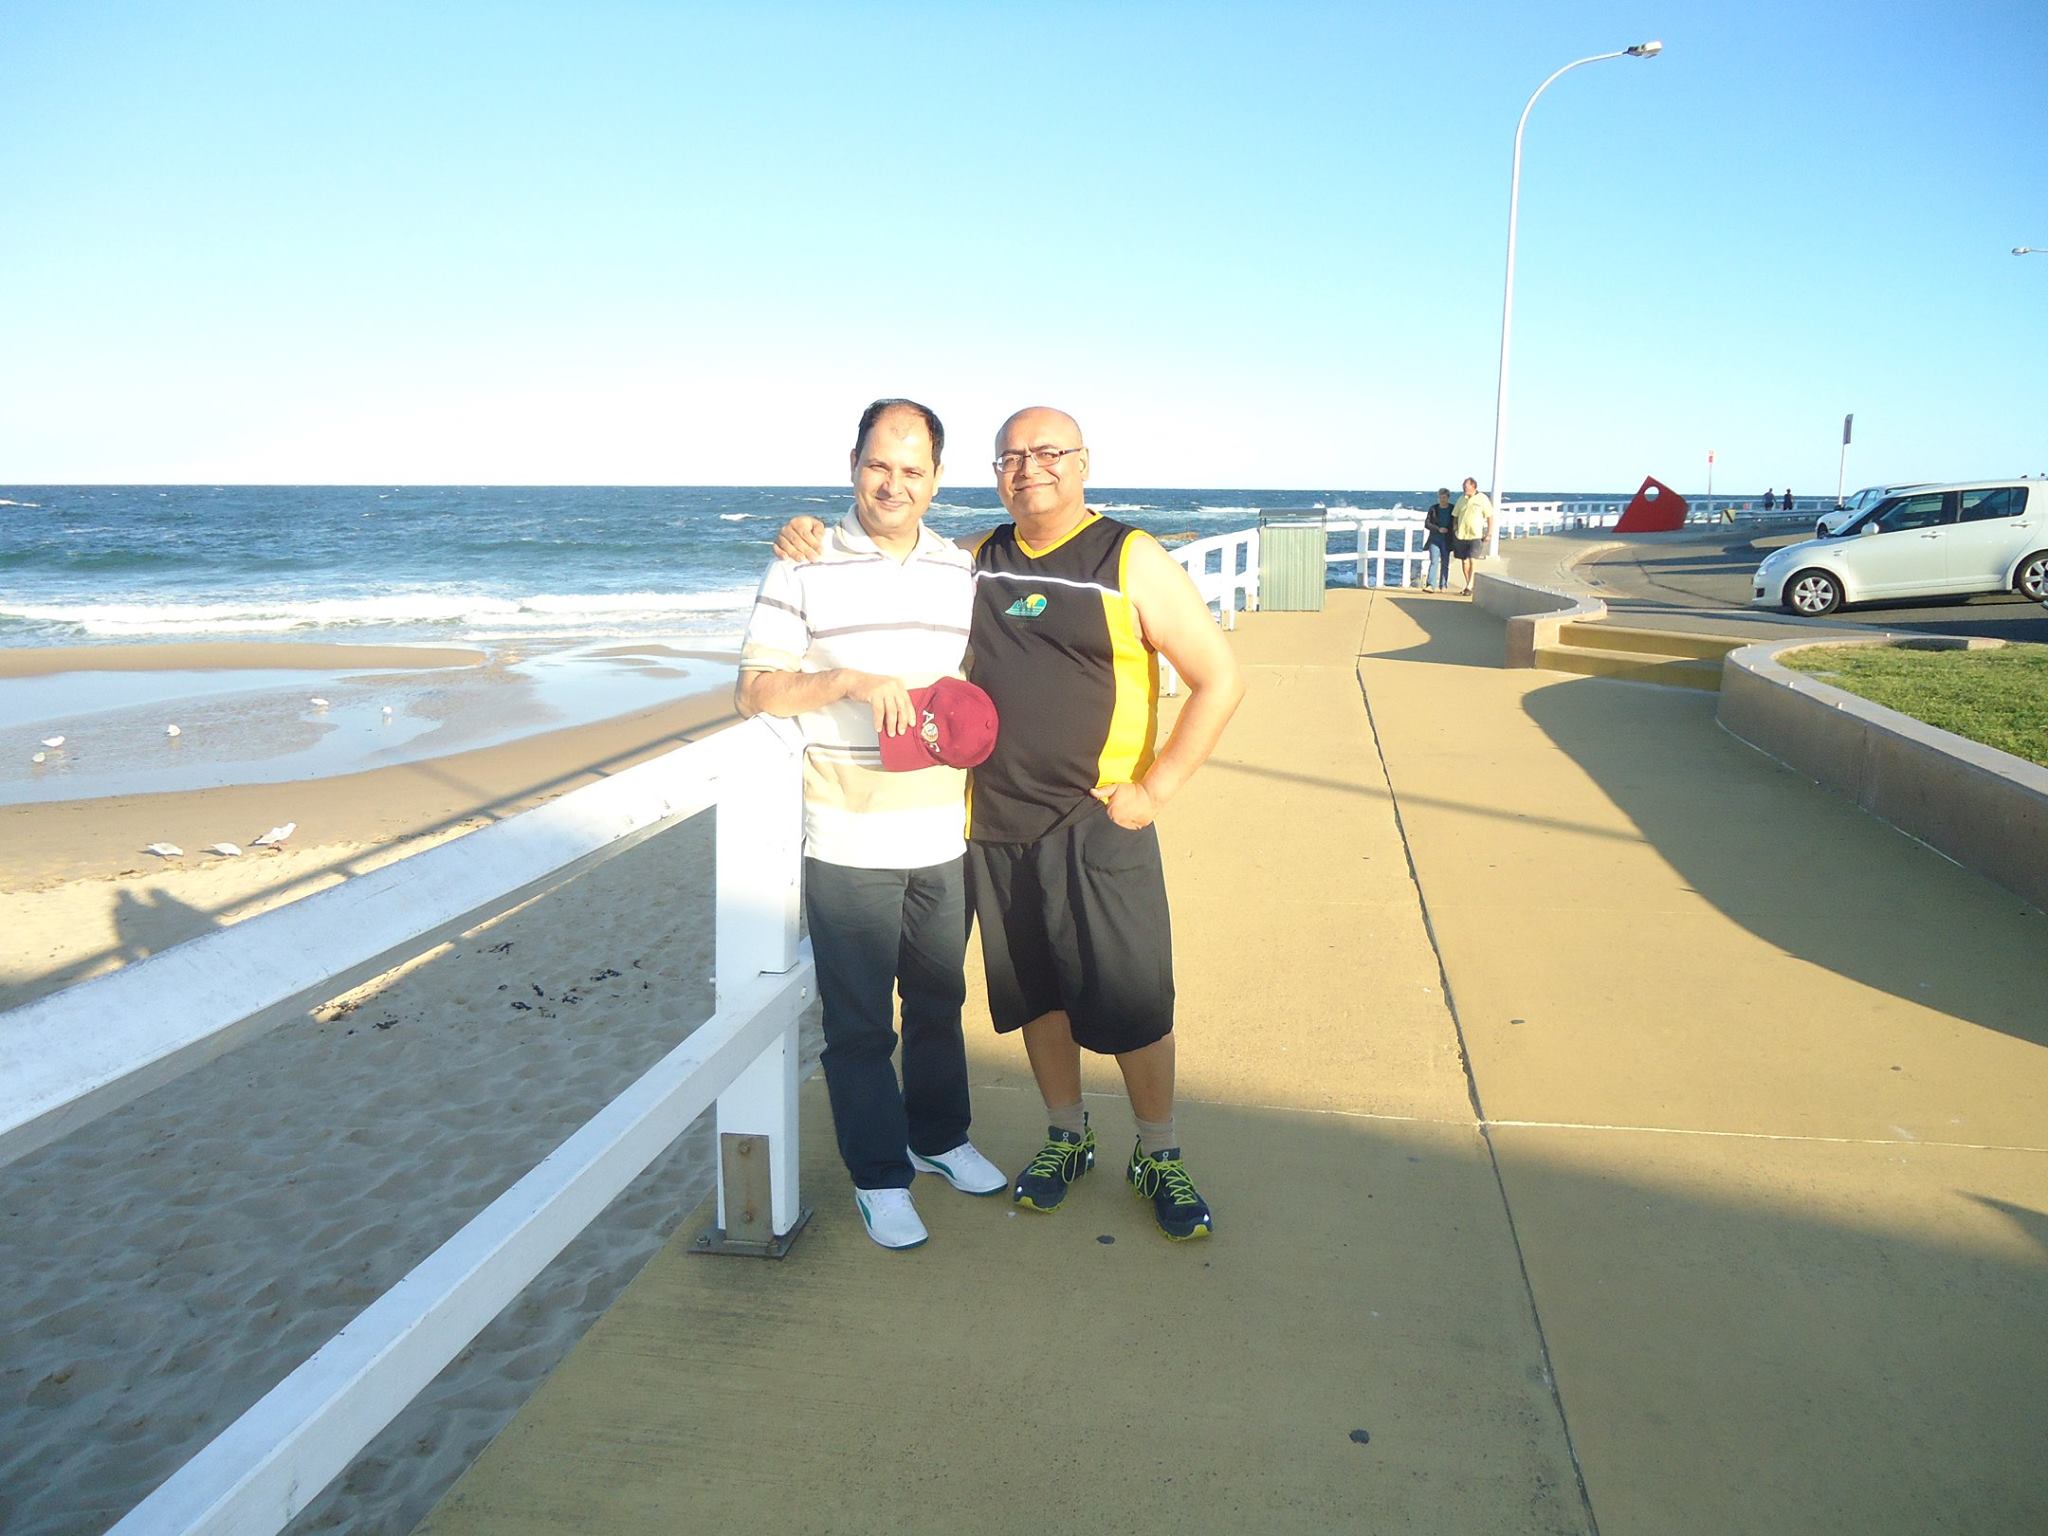 Morning walk in Newcastle beach. Newcastle is an amazing place to live and experience.